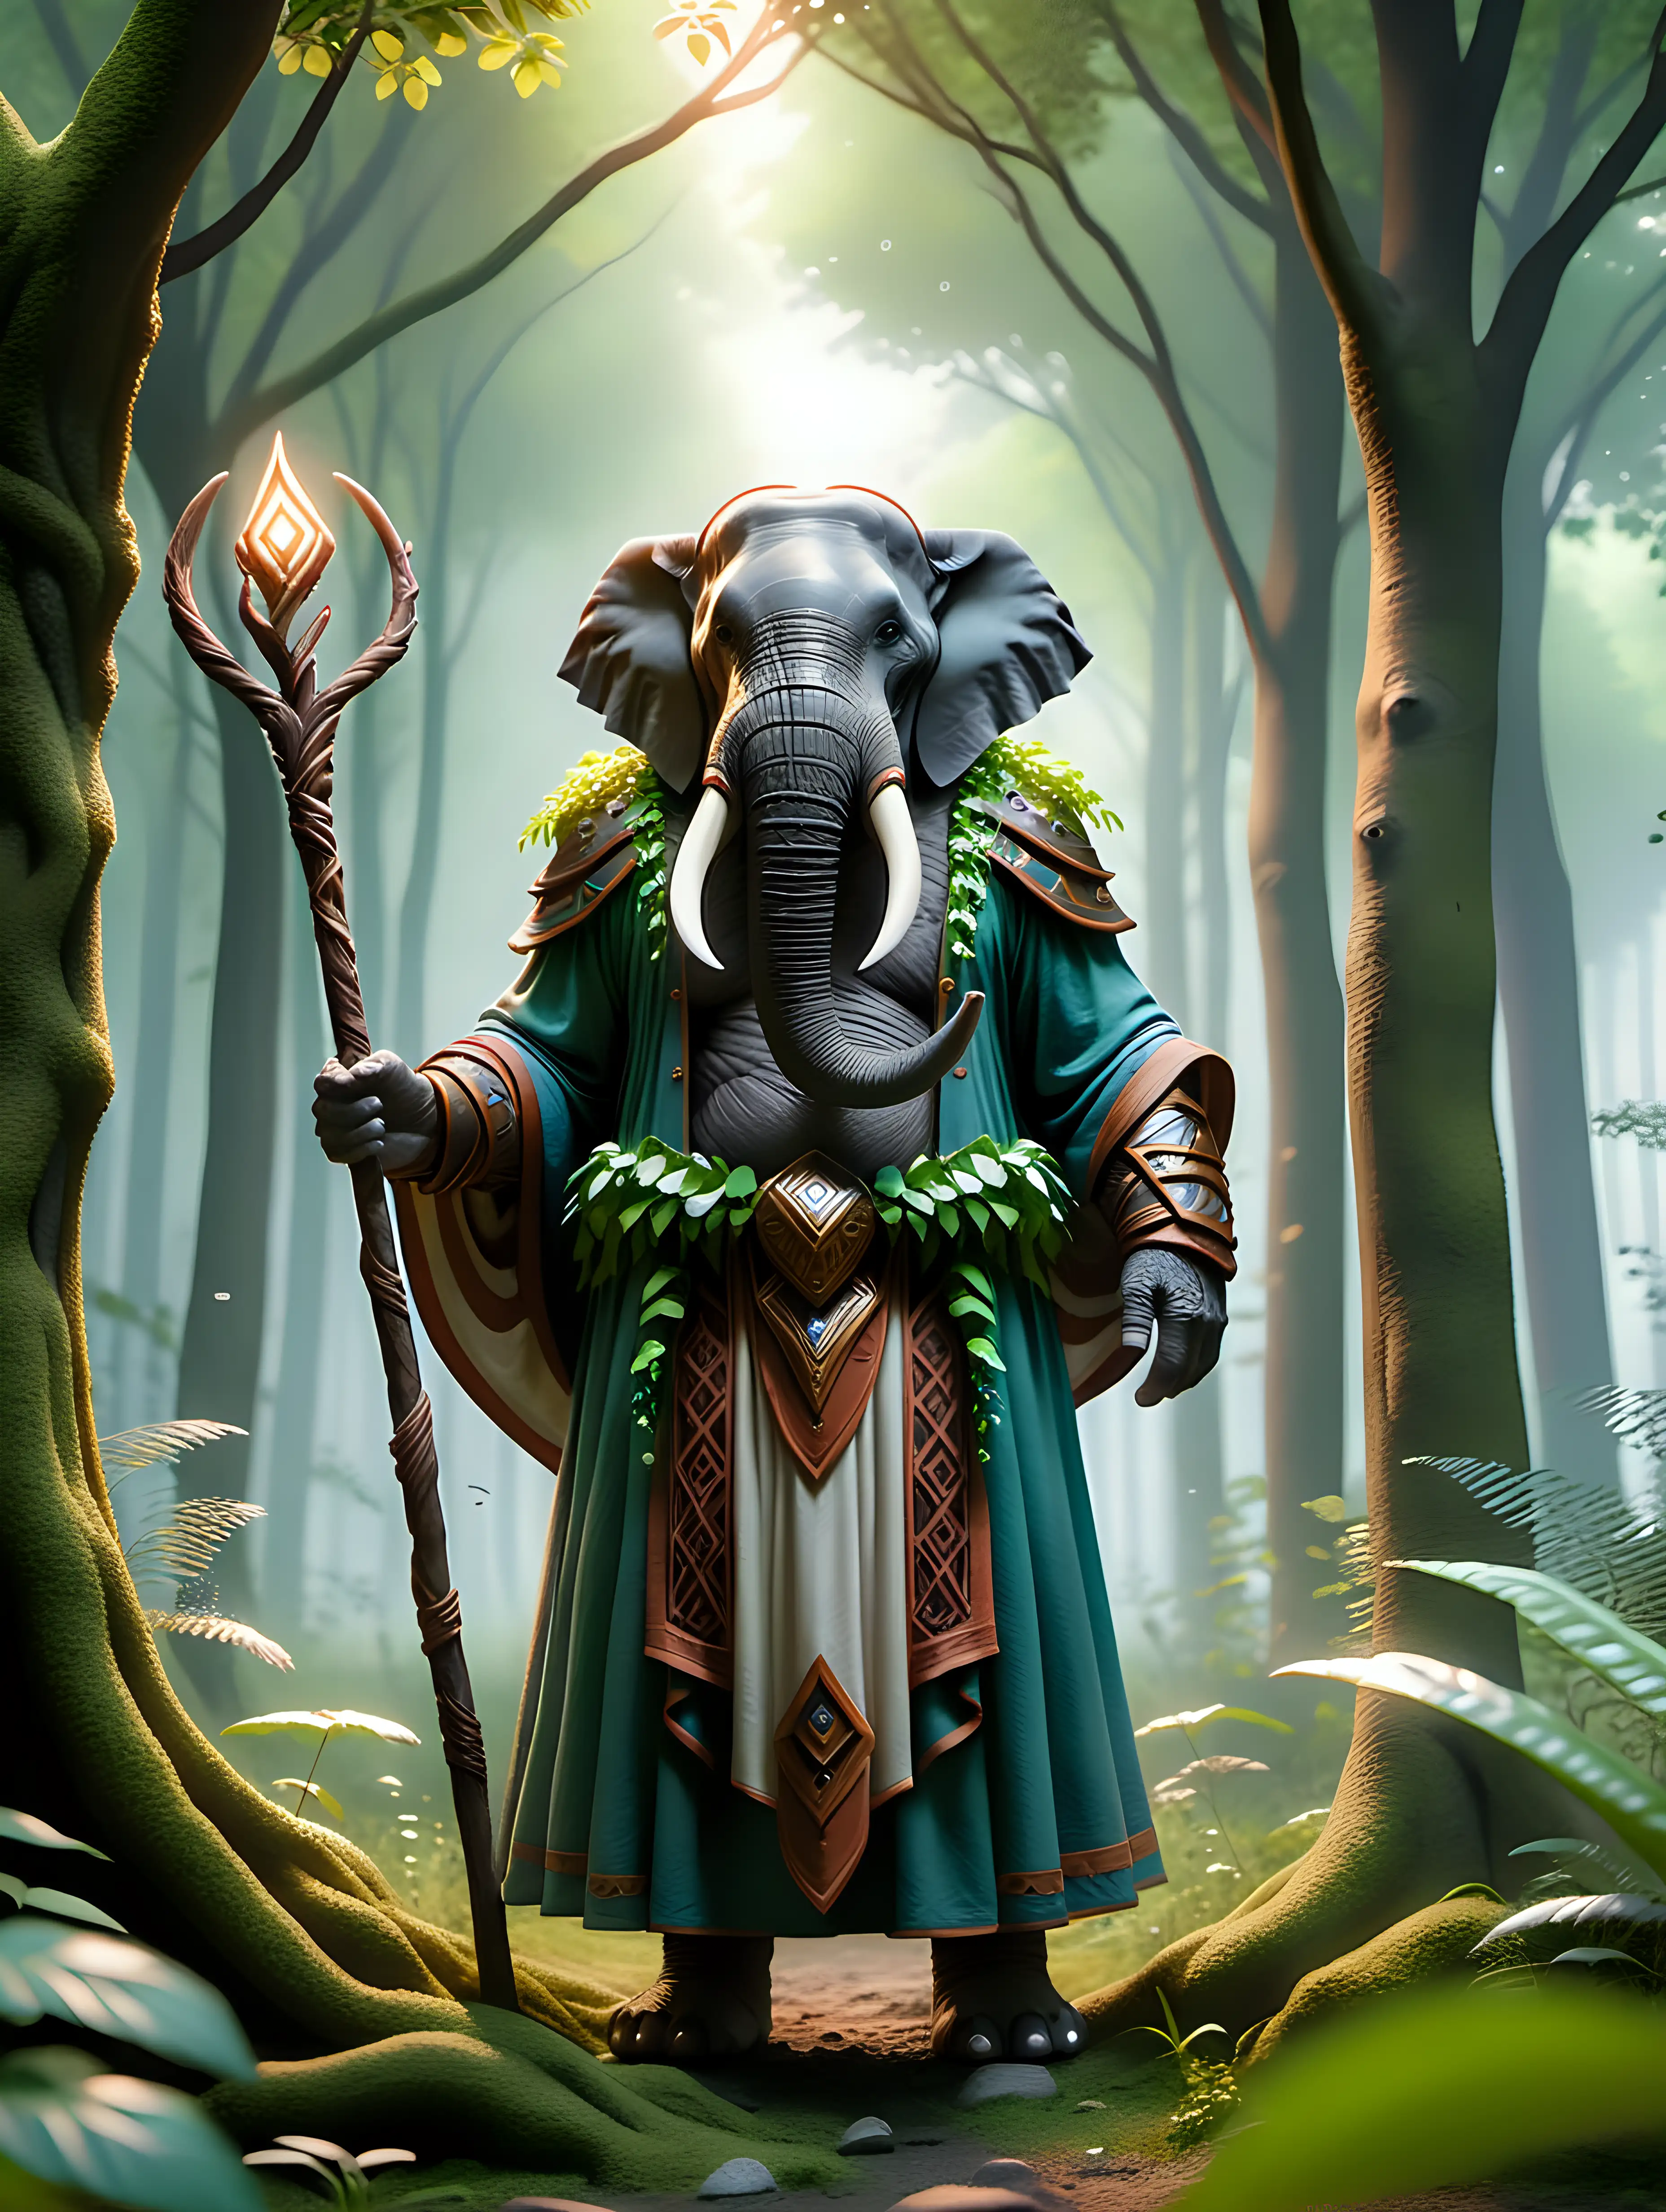 loxodon humanoid druid with staff in a glade